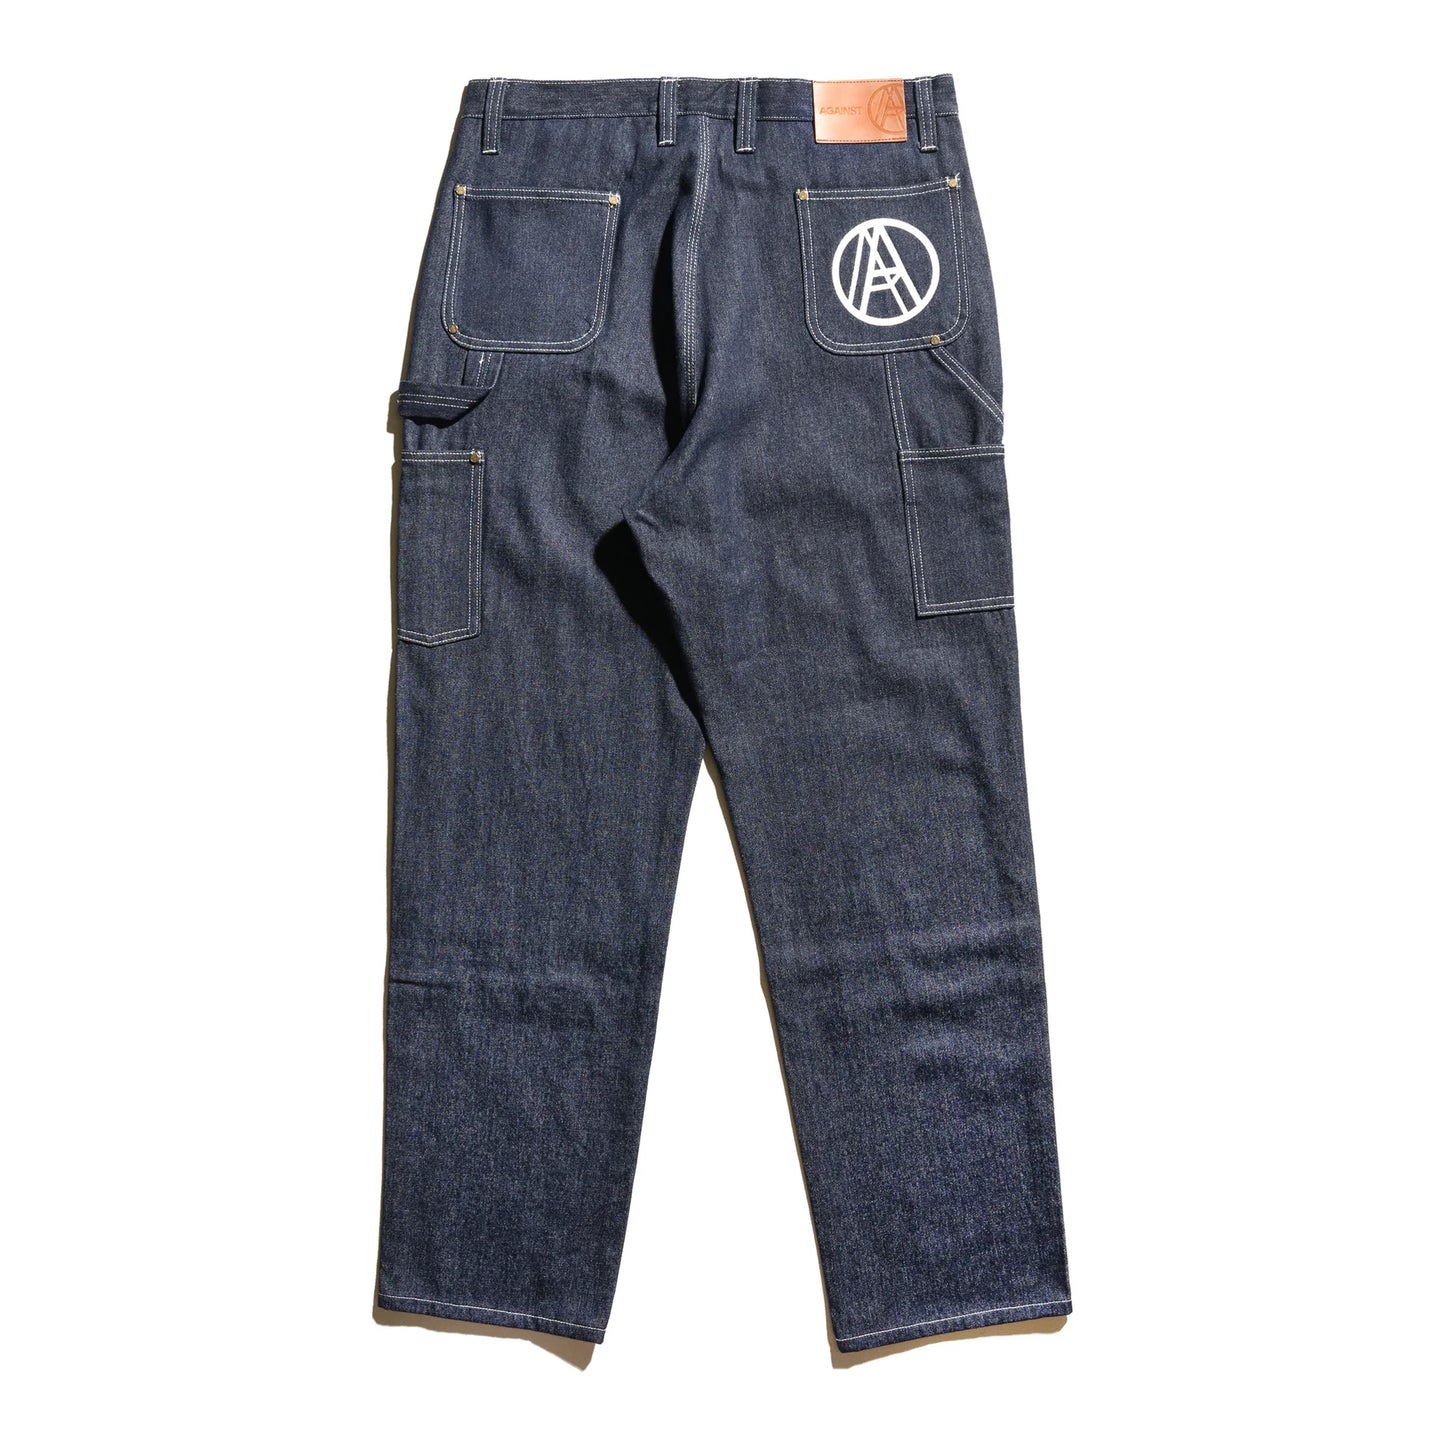 RAW DOUBLE KNEE JEANS